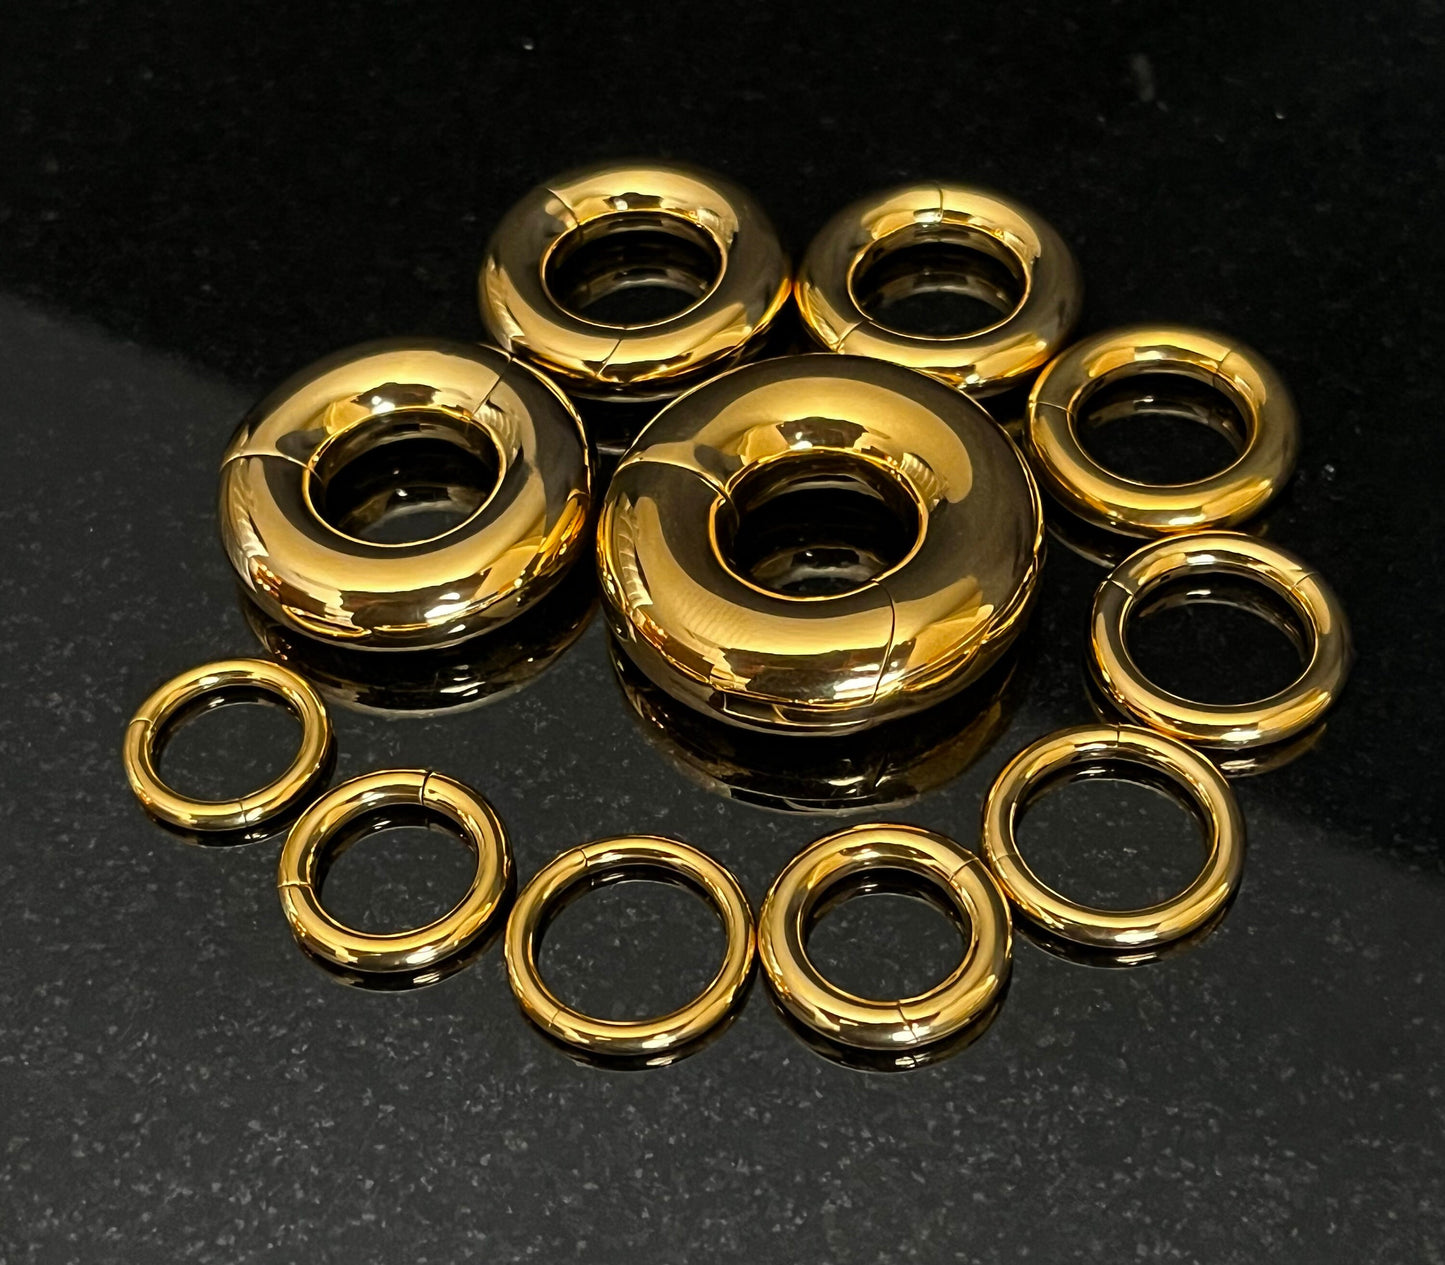 1 Piece Large Gauge IMPLANT GRADE TITANIUM Hinged Segment Ring/Hoop - Easy and Secure Clickers - Gauges 12g (2mm) thru 2g (6mm) Available!